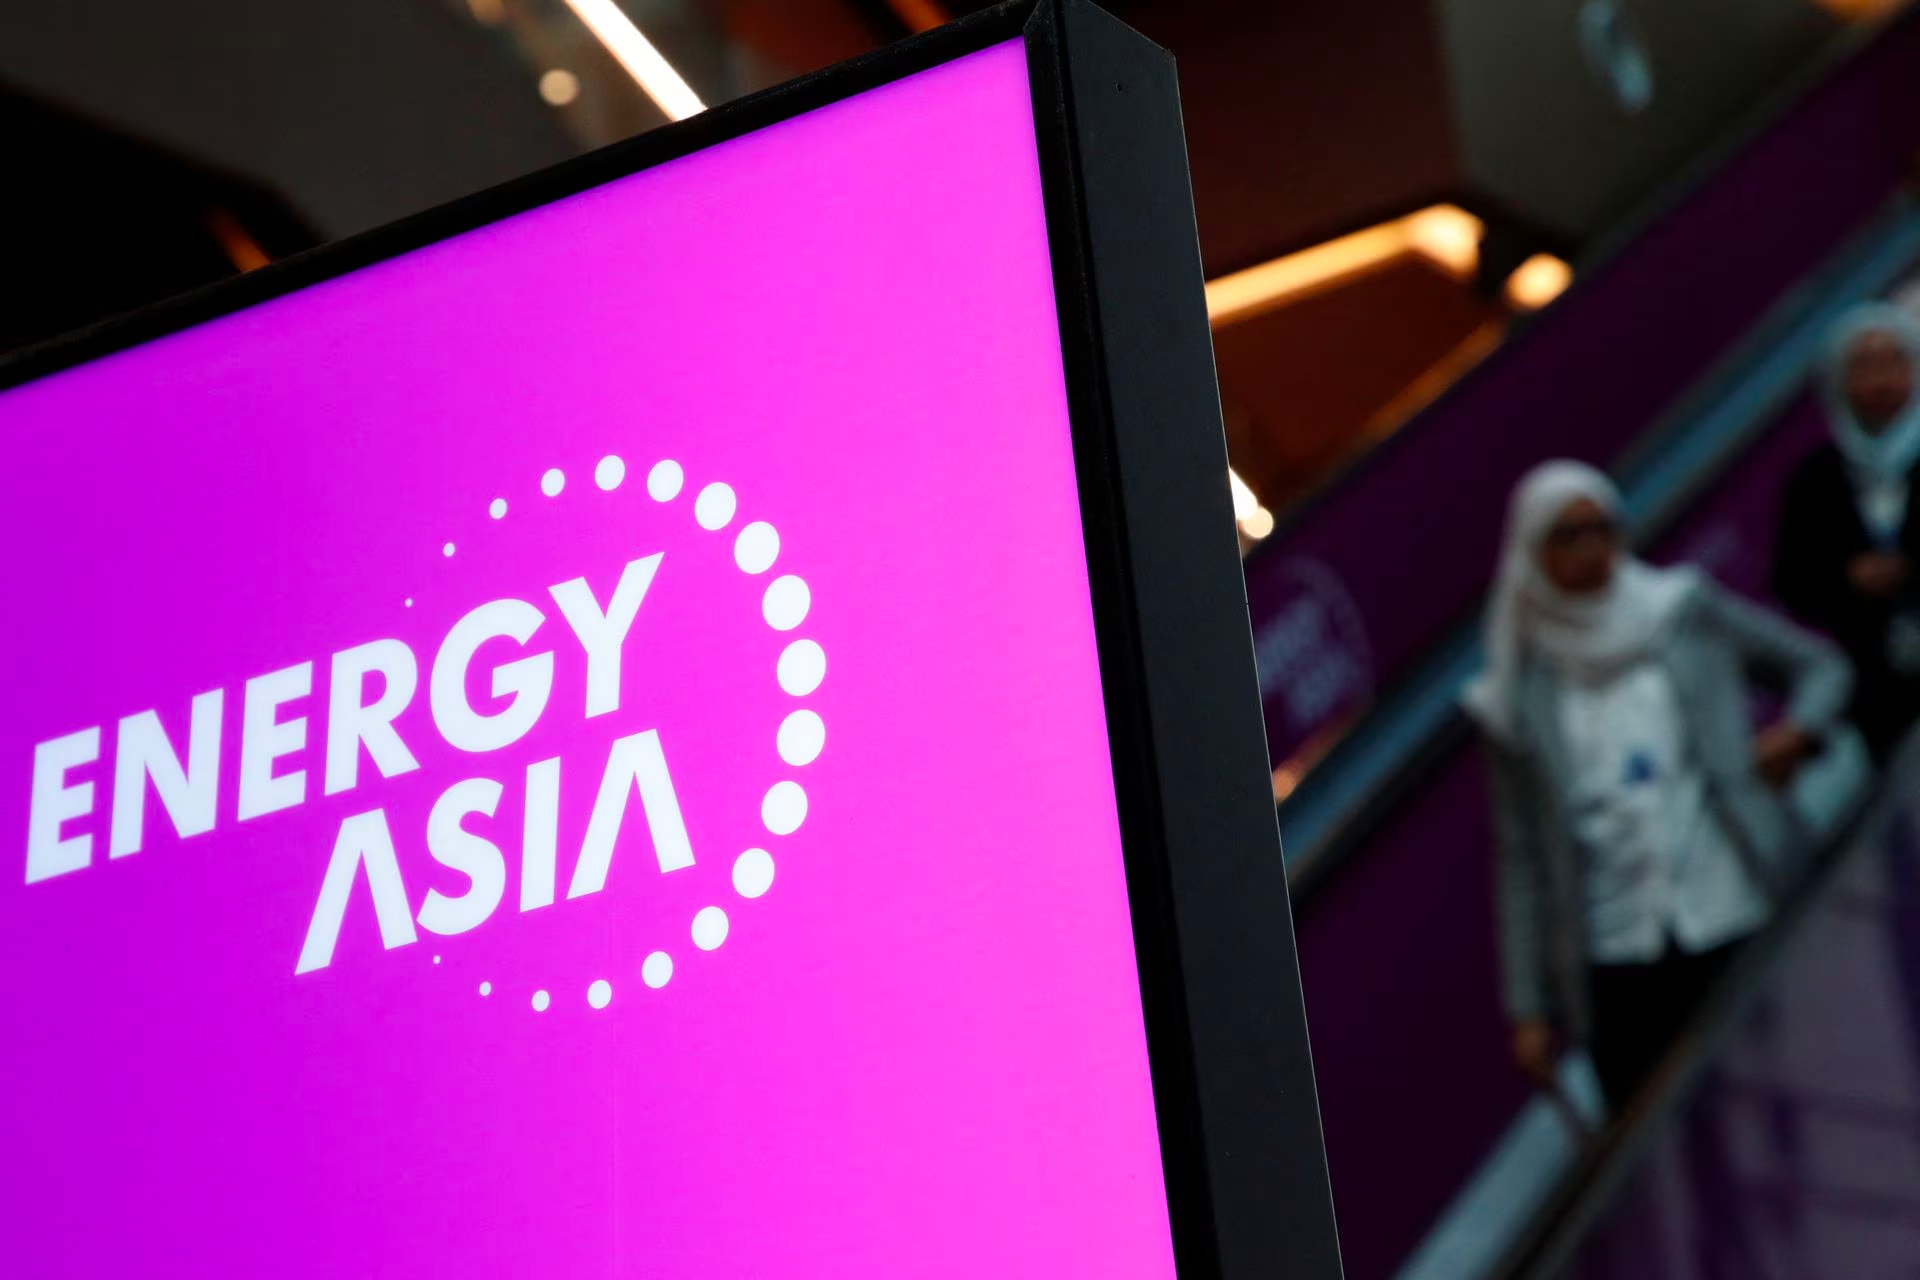 At Asia energy event, officials warn against sacrificing growth for transition